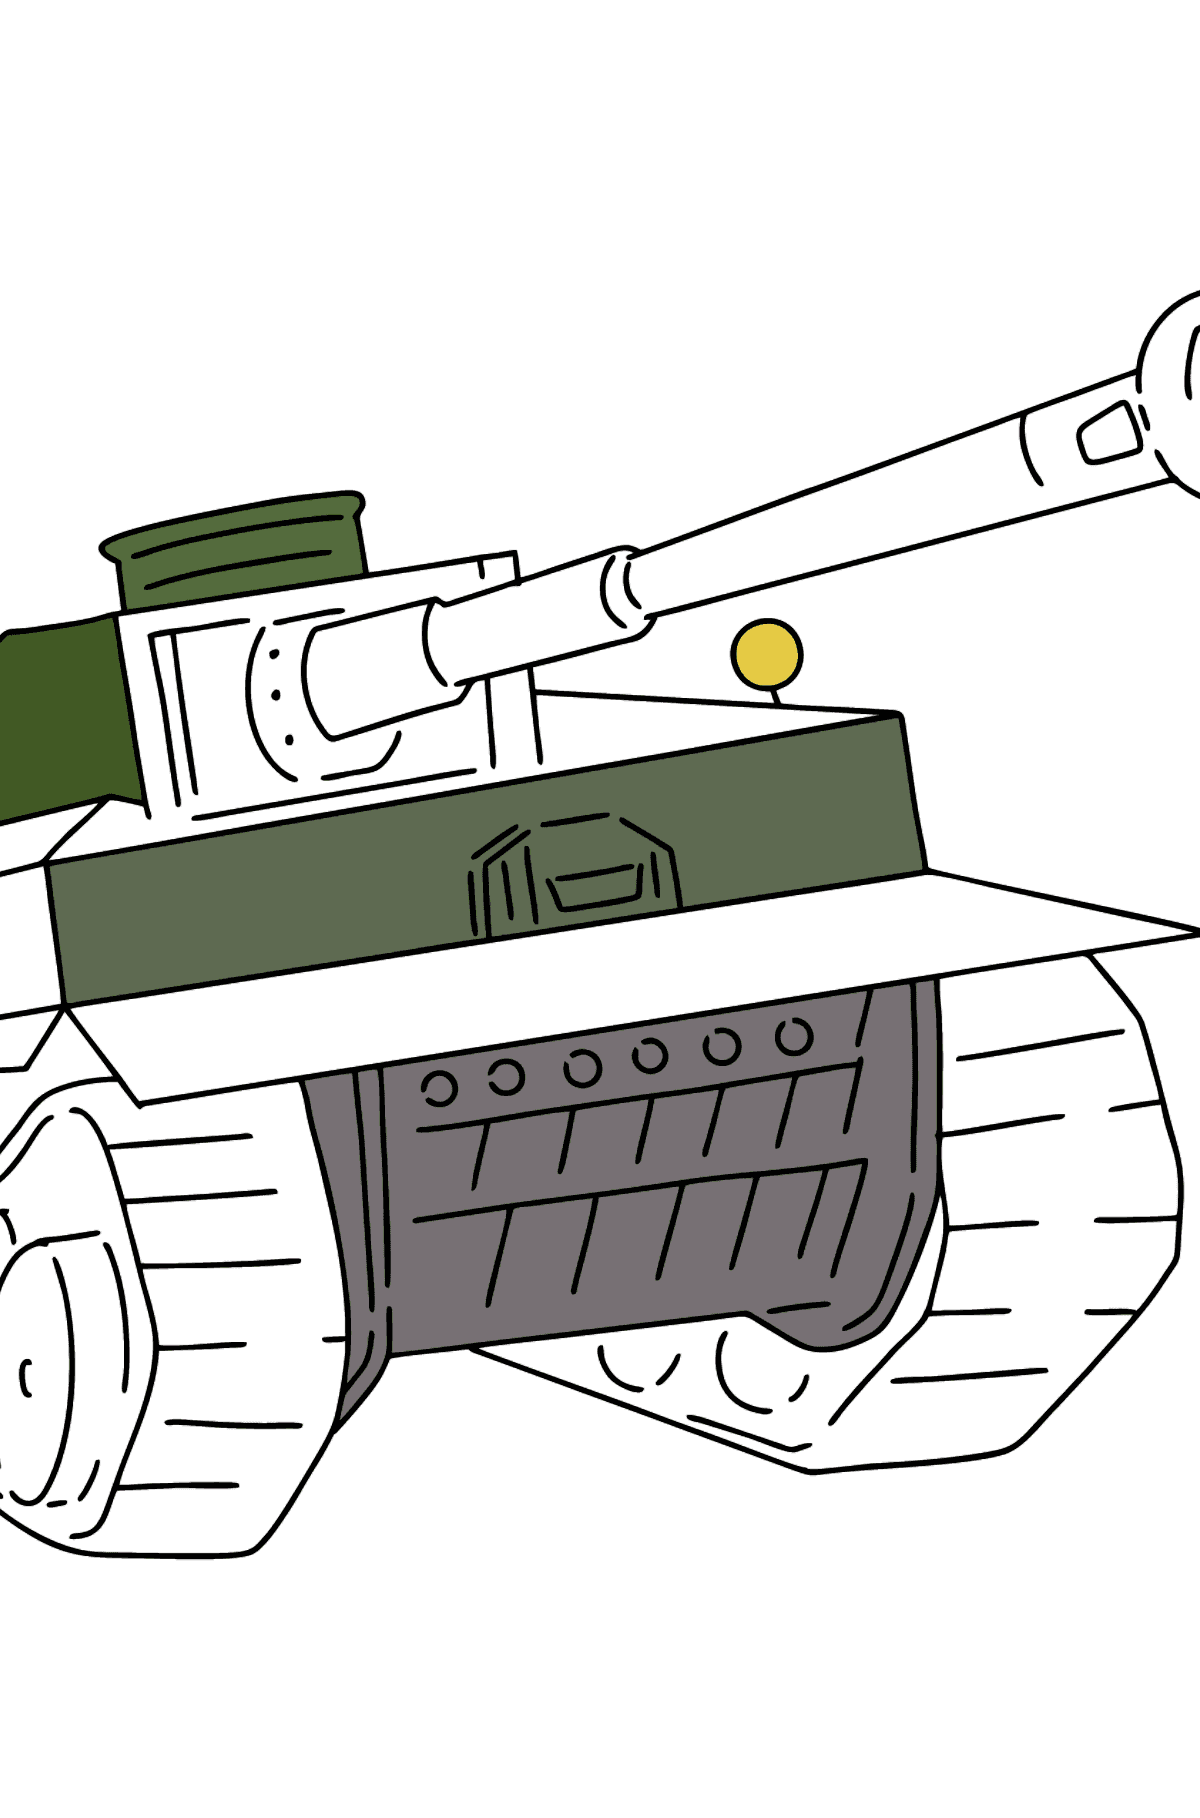 Tank Panther coloring page - Coloring Pages for Kids